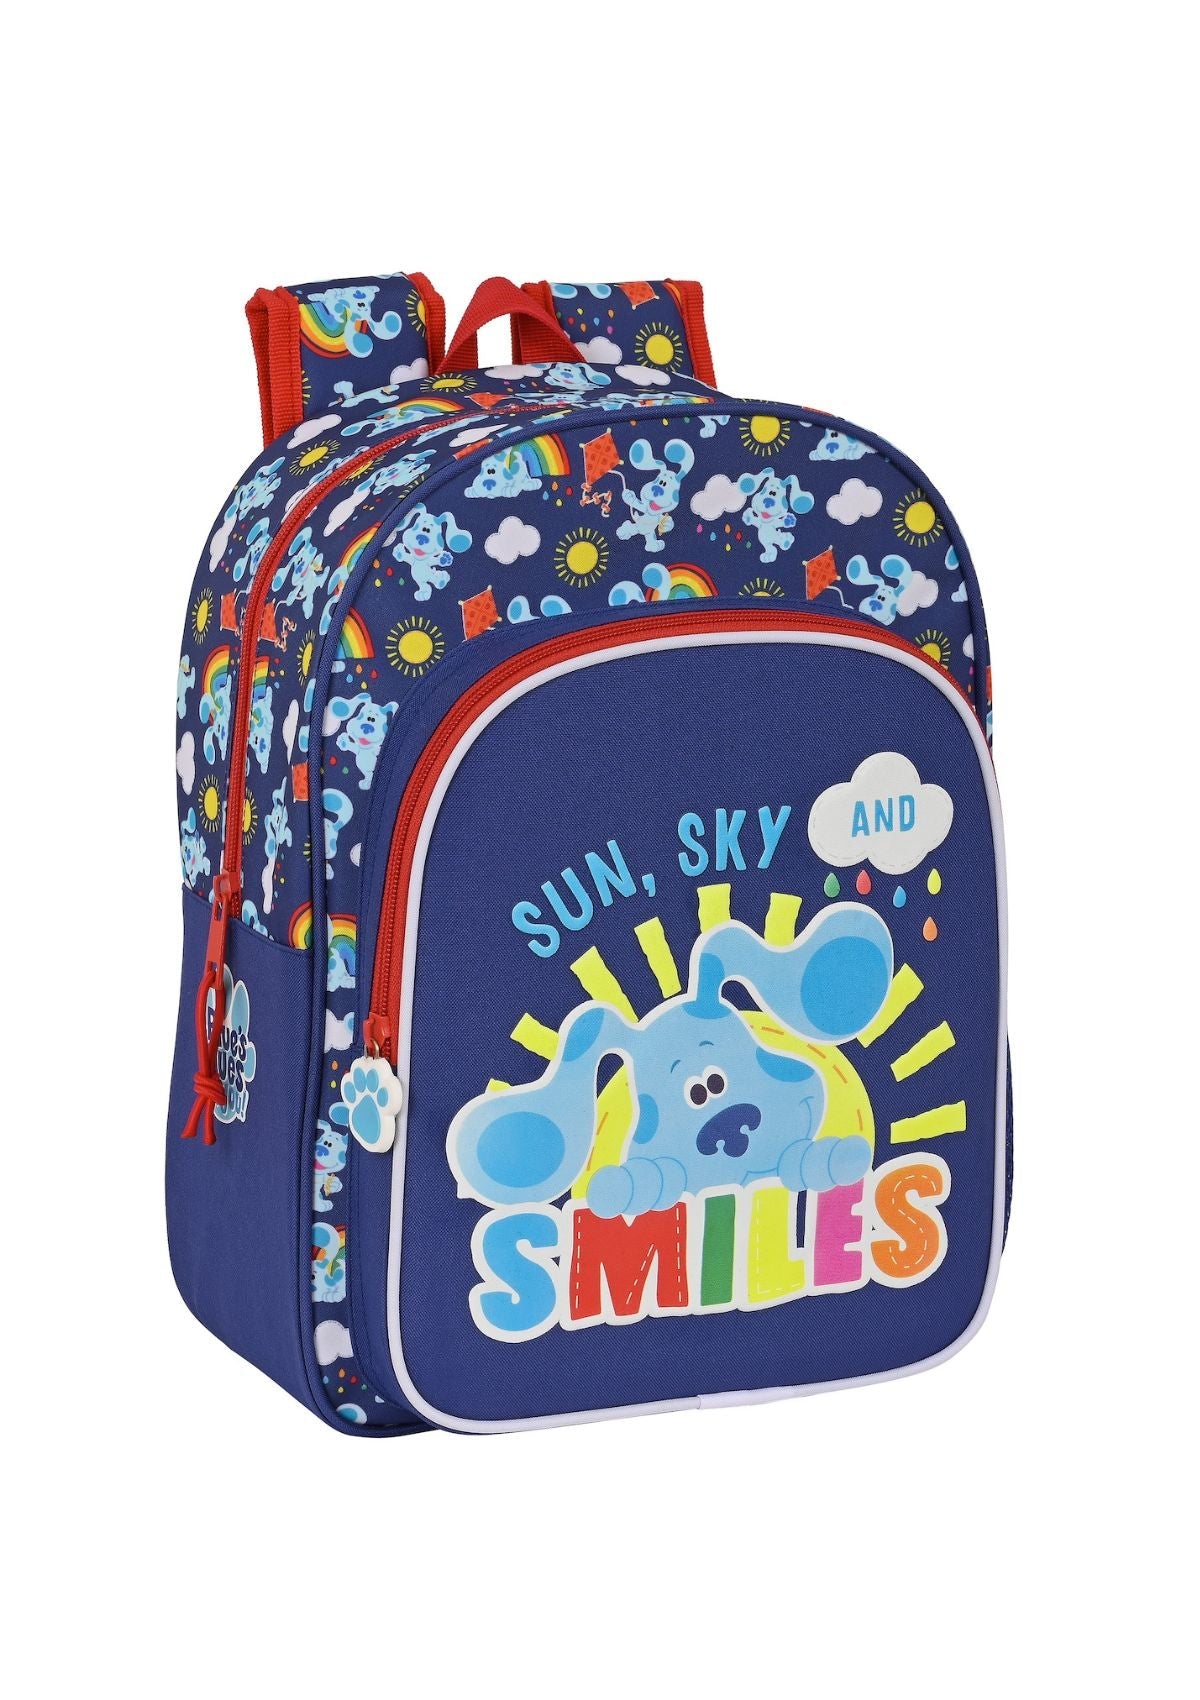 Safta Large Backpack Blue Clues Small Frontnt